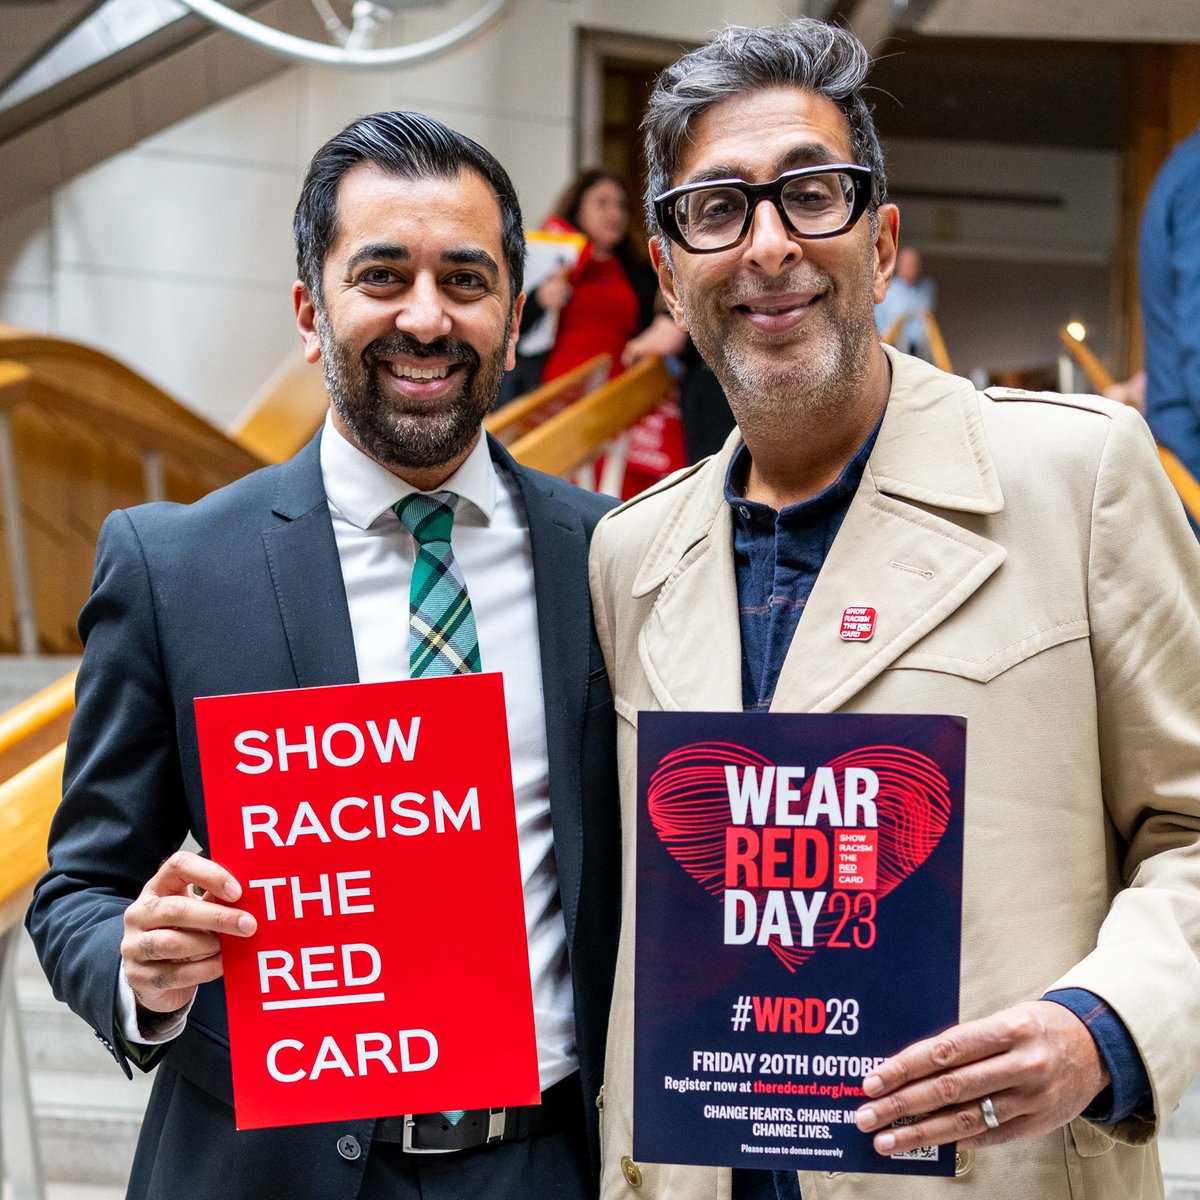 Show Racism the Red Card's Wear Red Day 23 is fast approaching.

Find out how you can help fight the scourge of racism: theredcard.org/wearredday

@govindajeggy joined us at @ScotParl today to encourage everyone to wear red on Friday 20th October to #ShowRacismtheRedCard

#WRD23